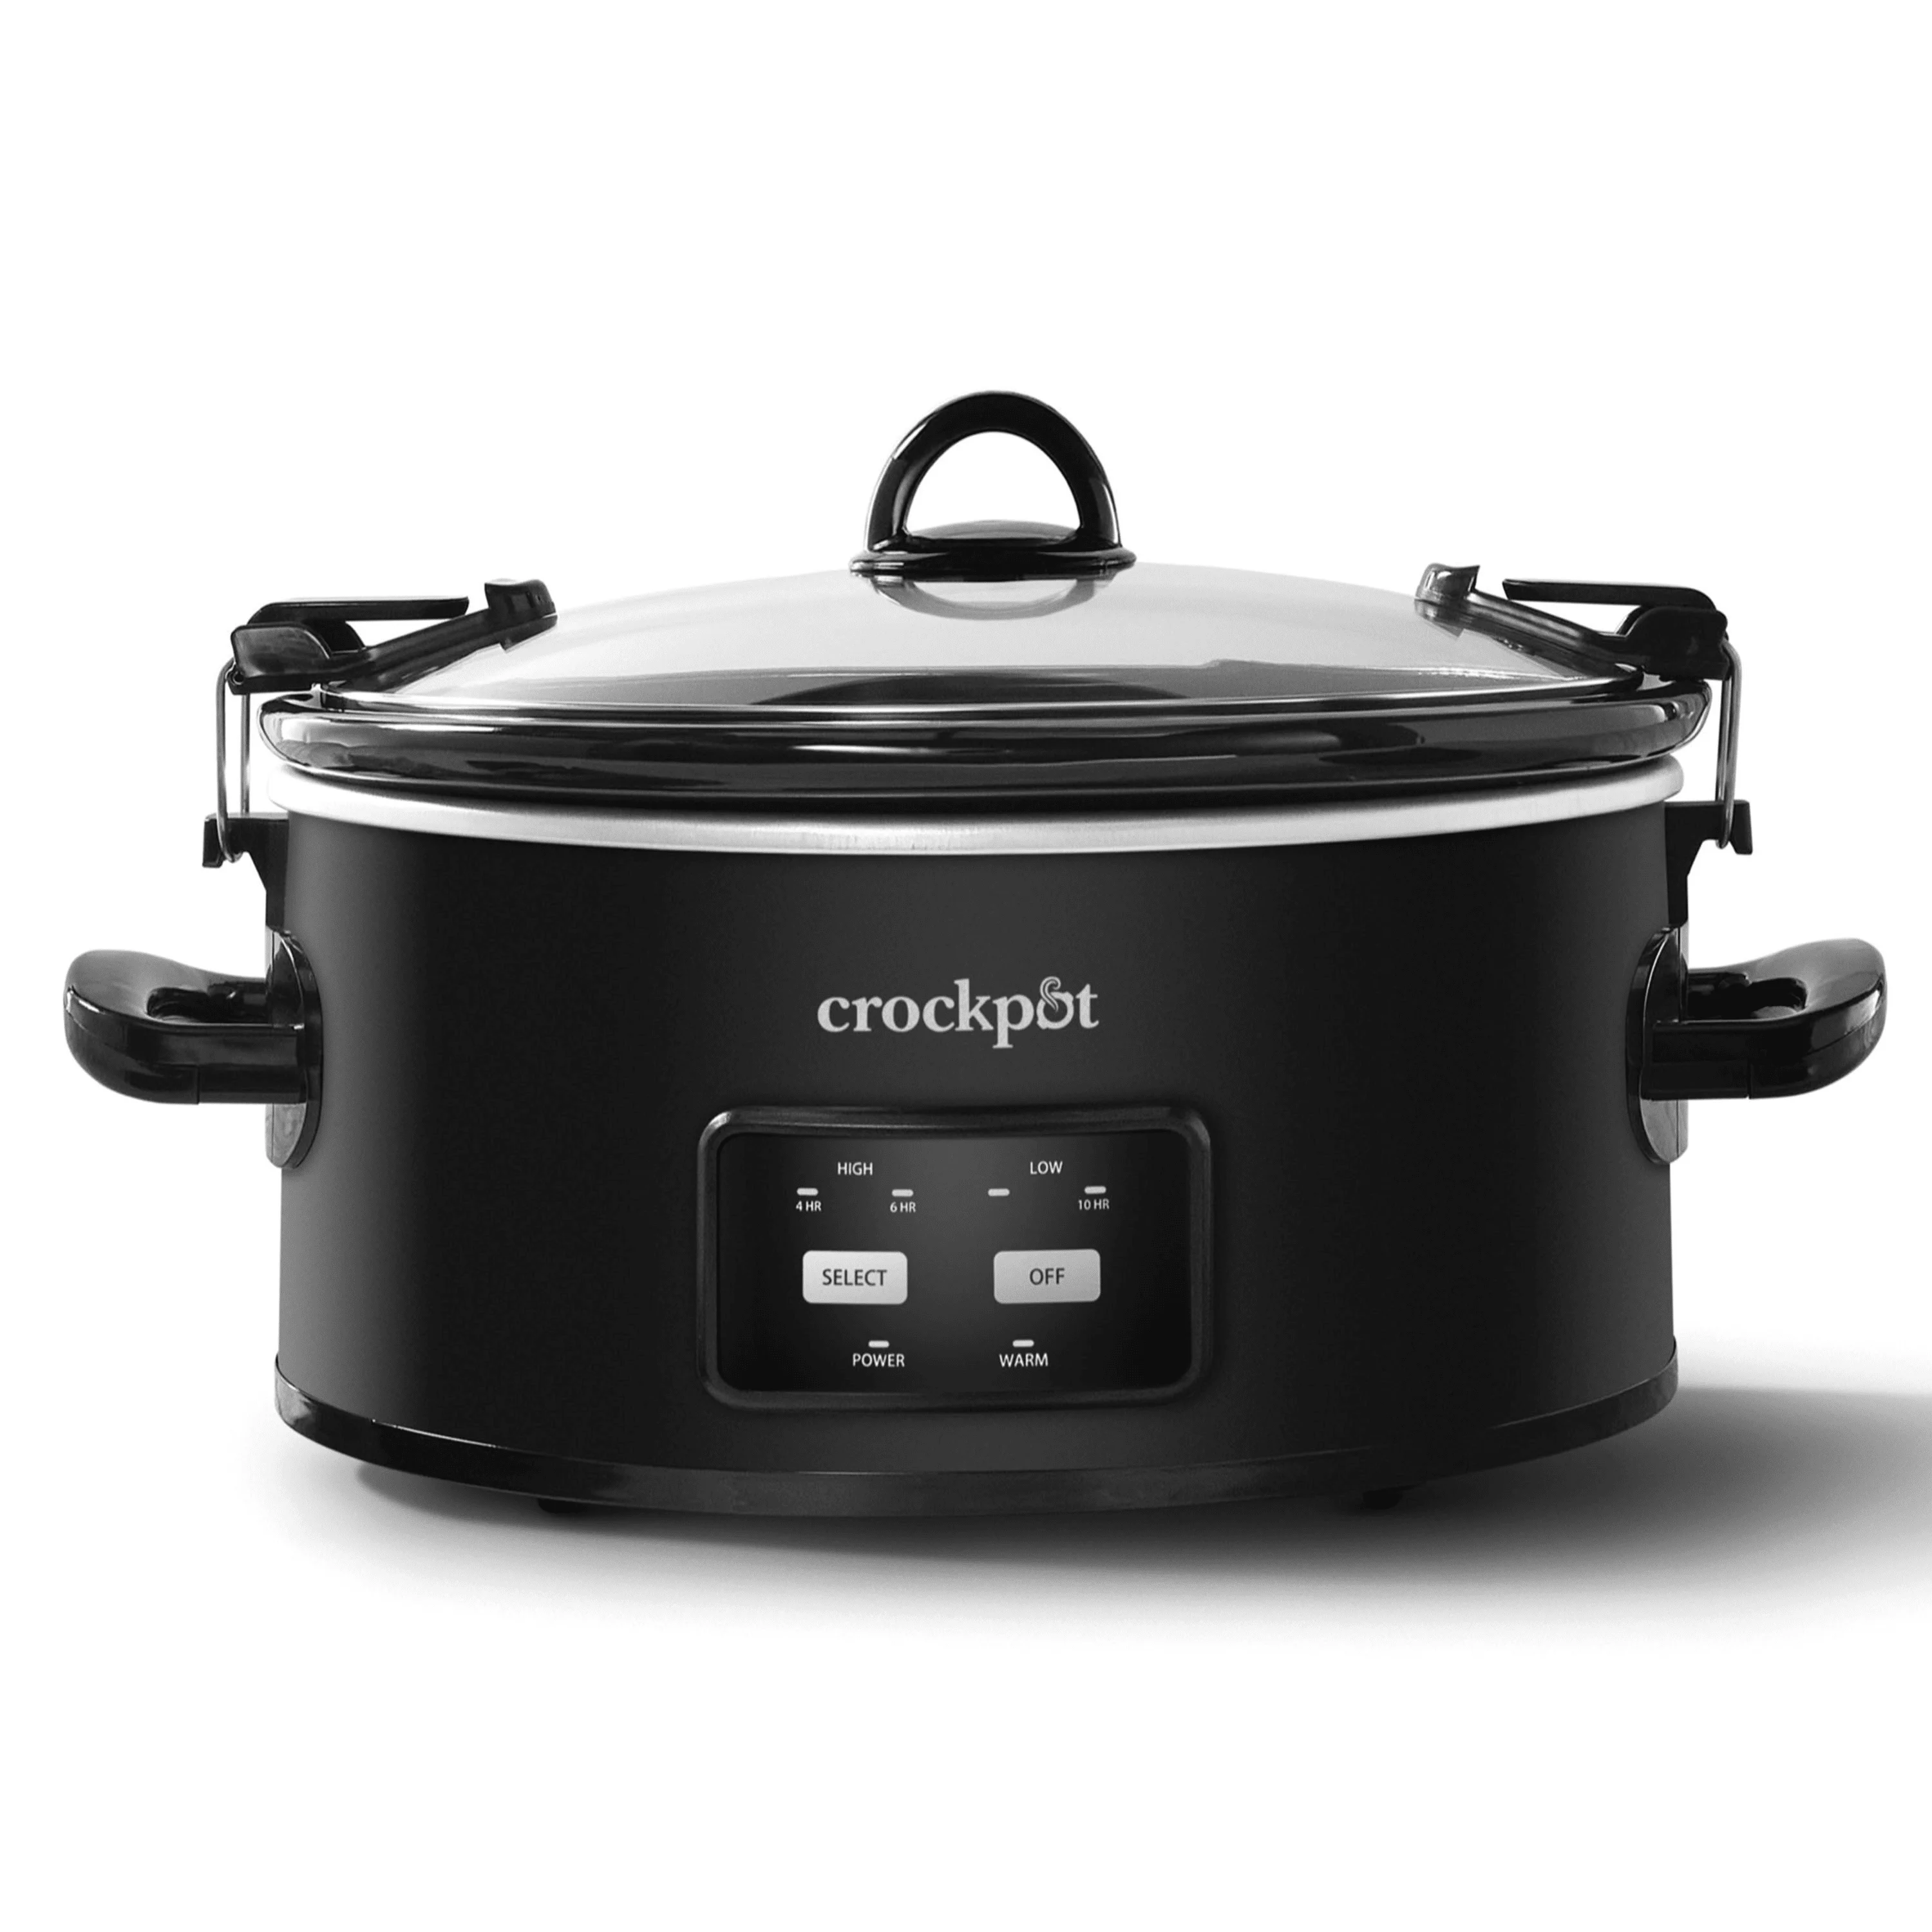 

Crockpot™ 6-Quart Cook & Carry Slow Cooker, One-Touch Control Matte Black Hotpot Cooking Home Appliances for Kitchen